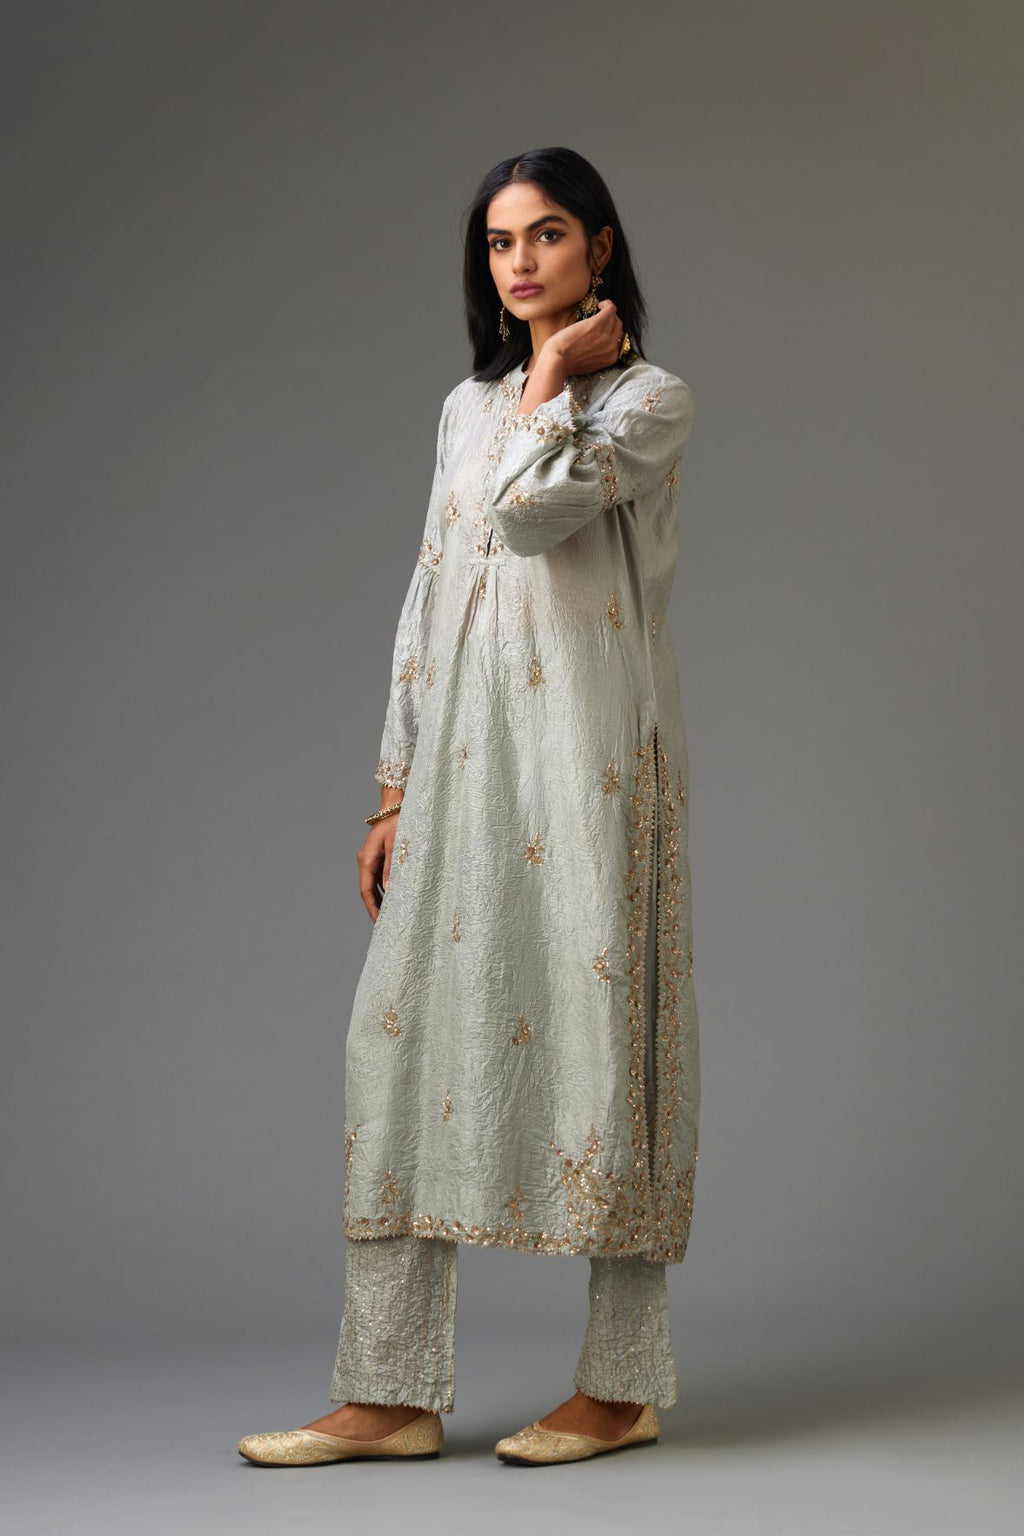 Blue hand crushed silk straight kurta set with all-over gold sequins and zari handwork, highlighted with gota lace at edges.